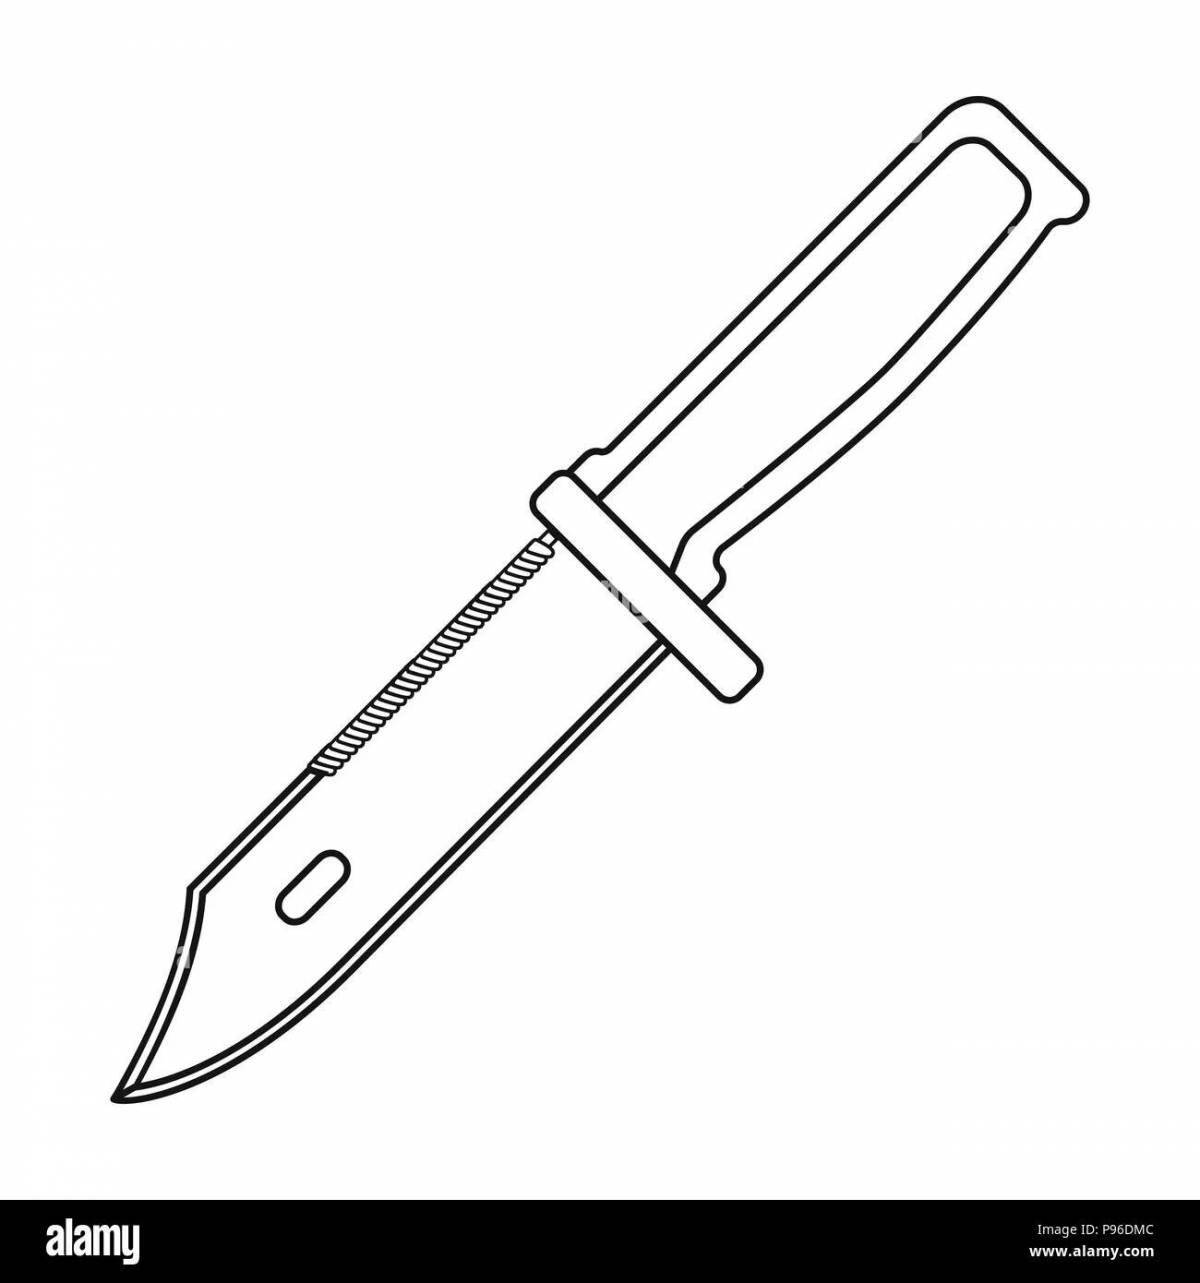 Colorful m9 knife coloring page